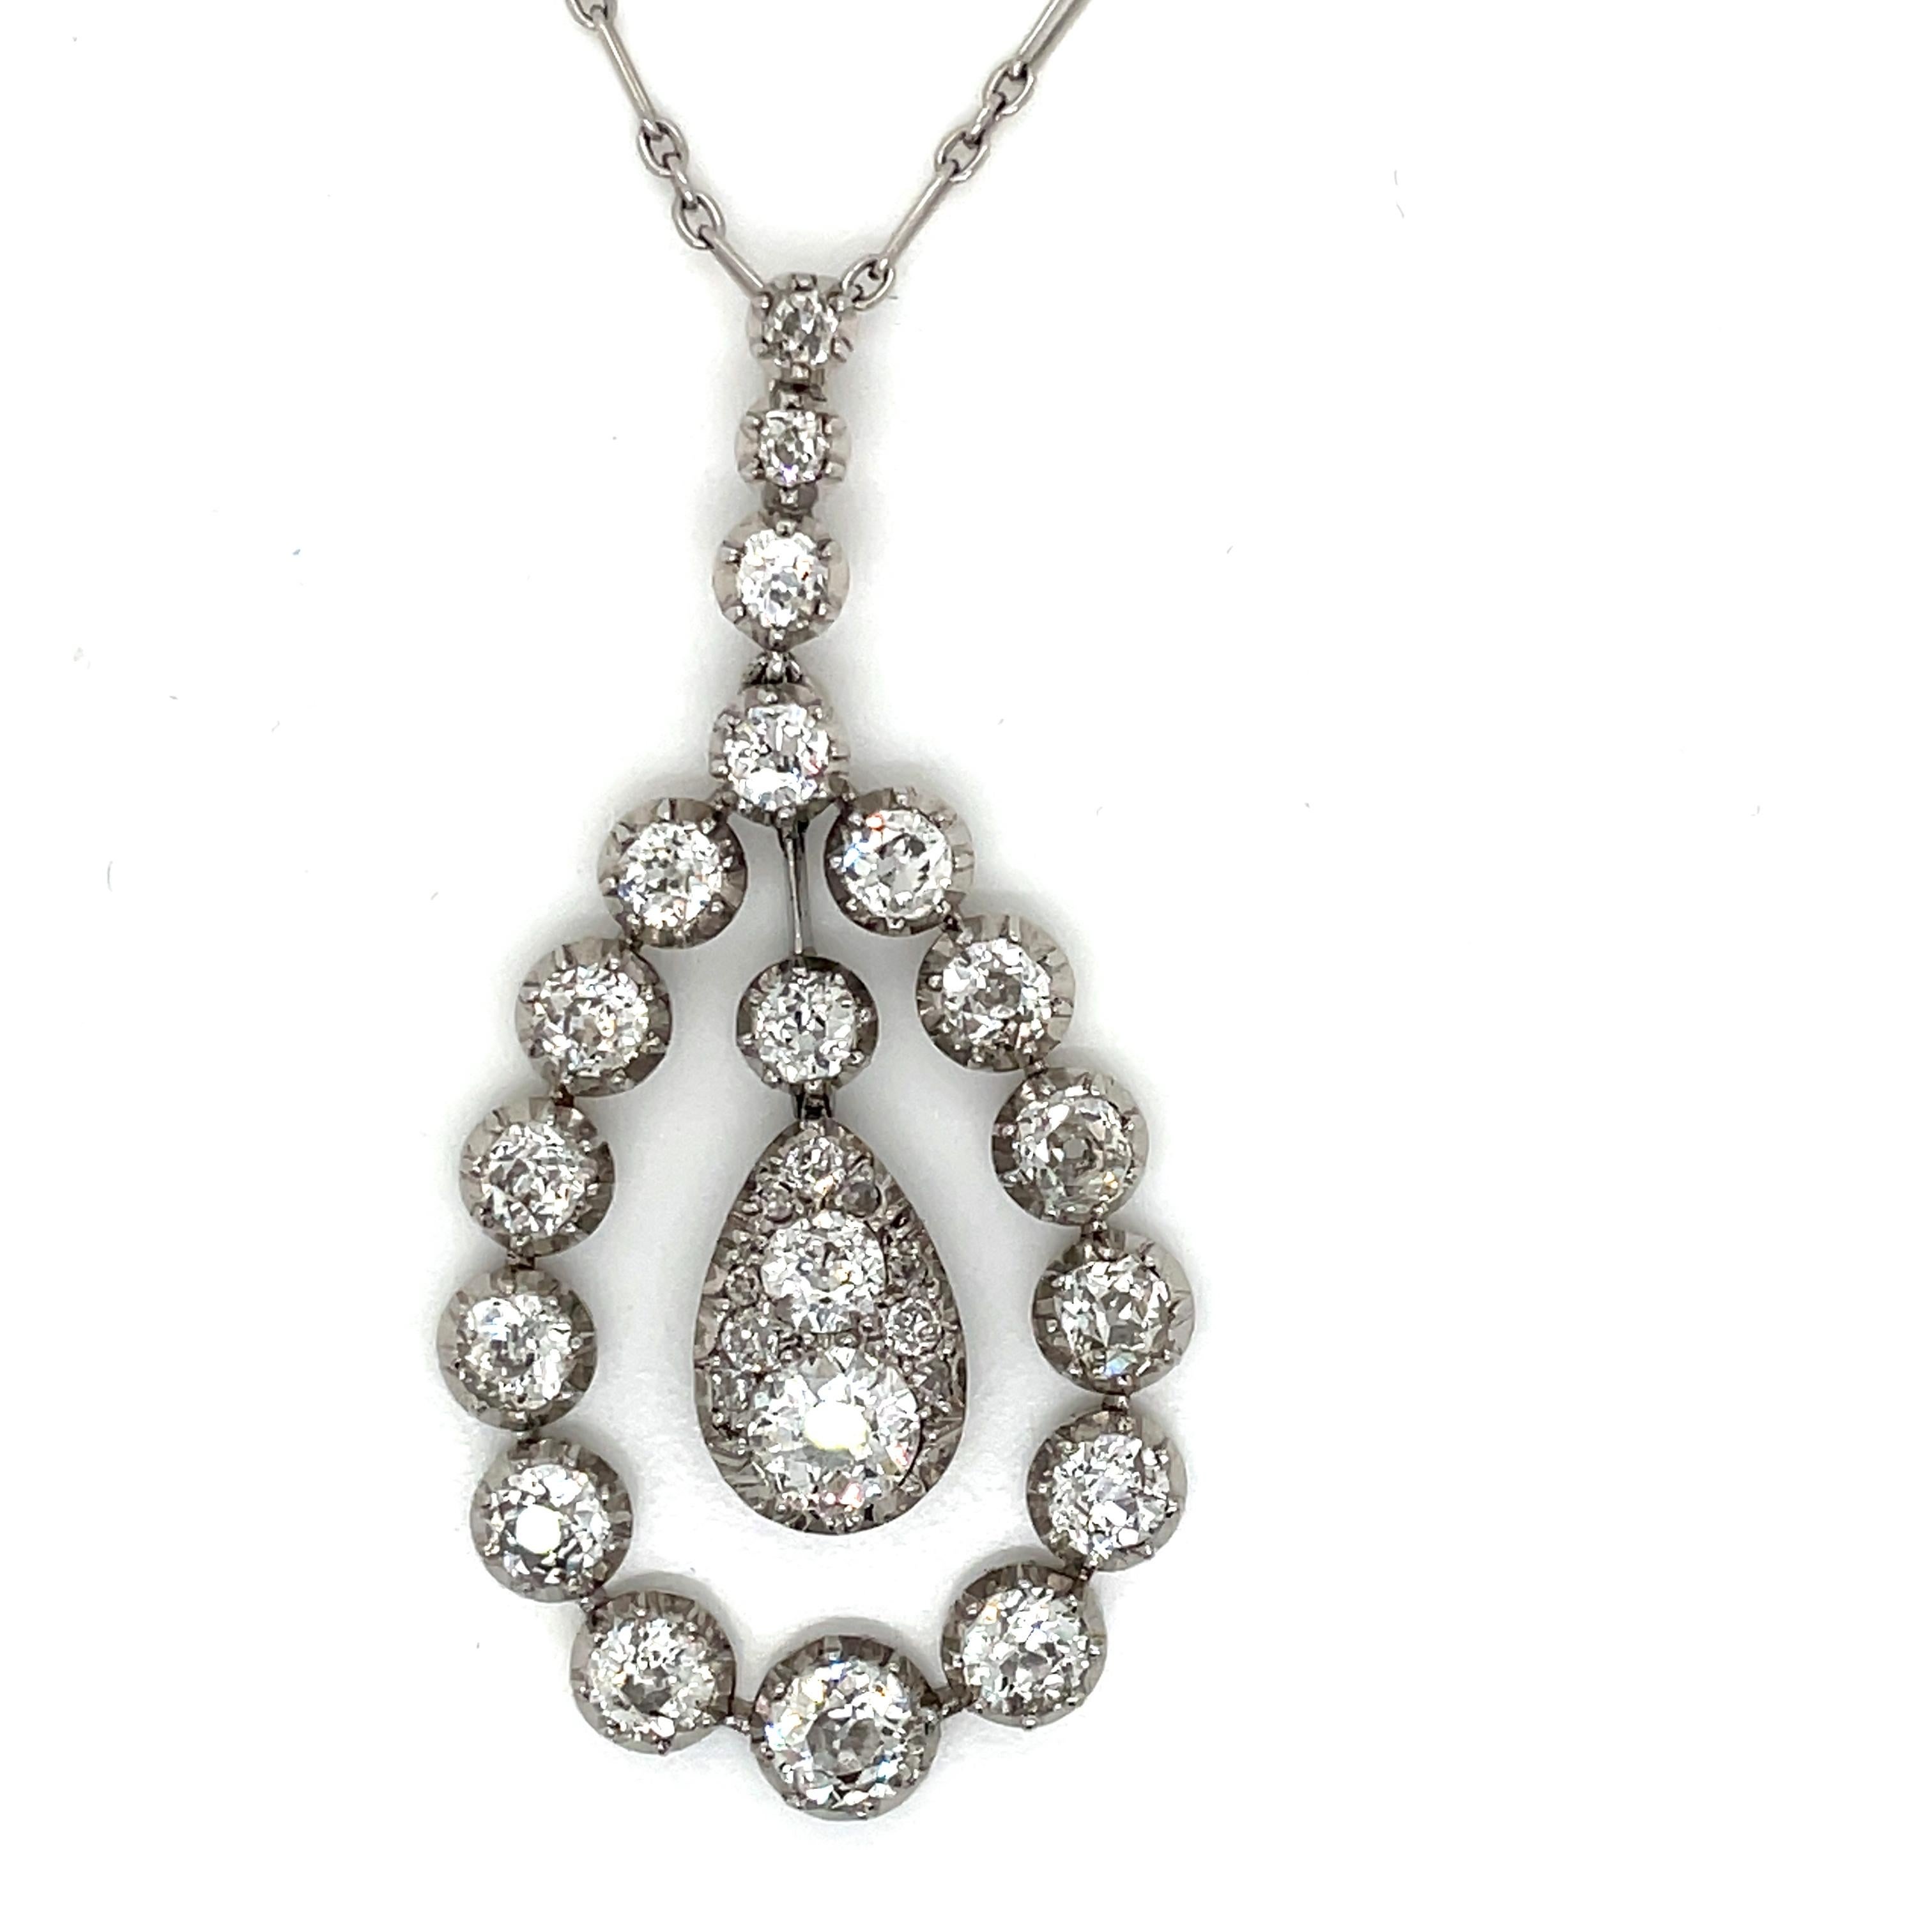 Precious platinum pendant with a typical Belle Epoque design. Handcrafted at the beginning of the 20th century, it is set with approximately 7,0 ct of old mine cut diamonds (VS clarity - H/I color).

CONDITION: Pre-owned - Excellent
METAL: